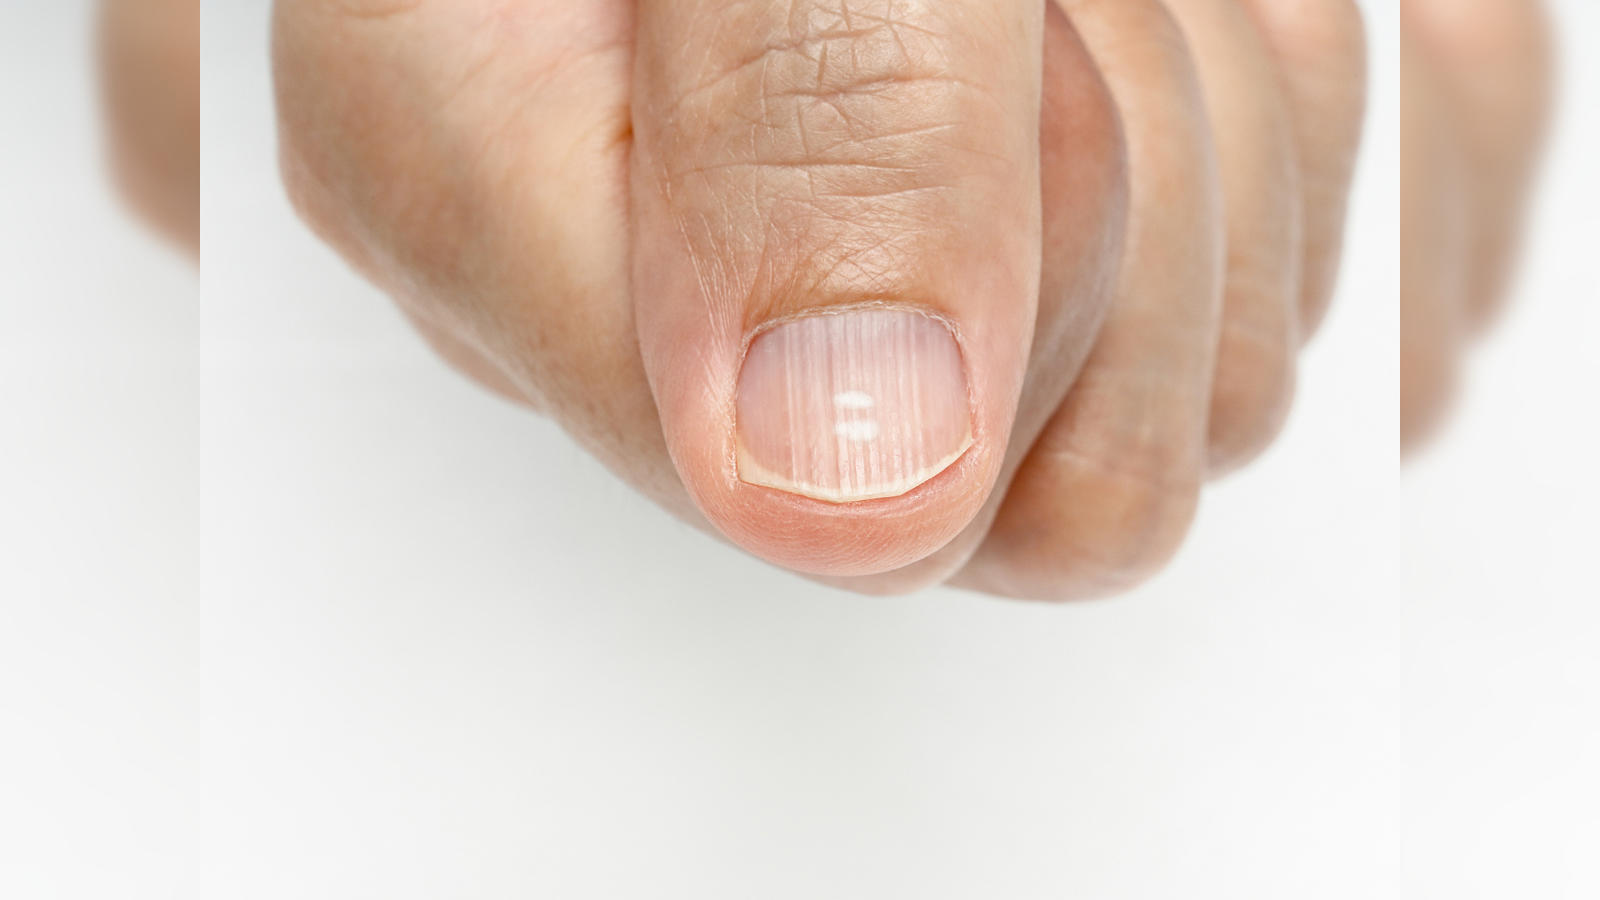 Fingernail Bed Inflammation, Bacterial Infection Stock Image - Image of  inflammation, abscess: 53340941